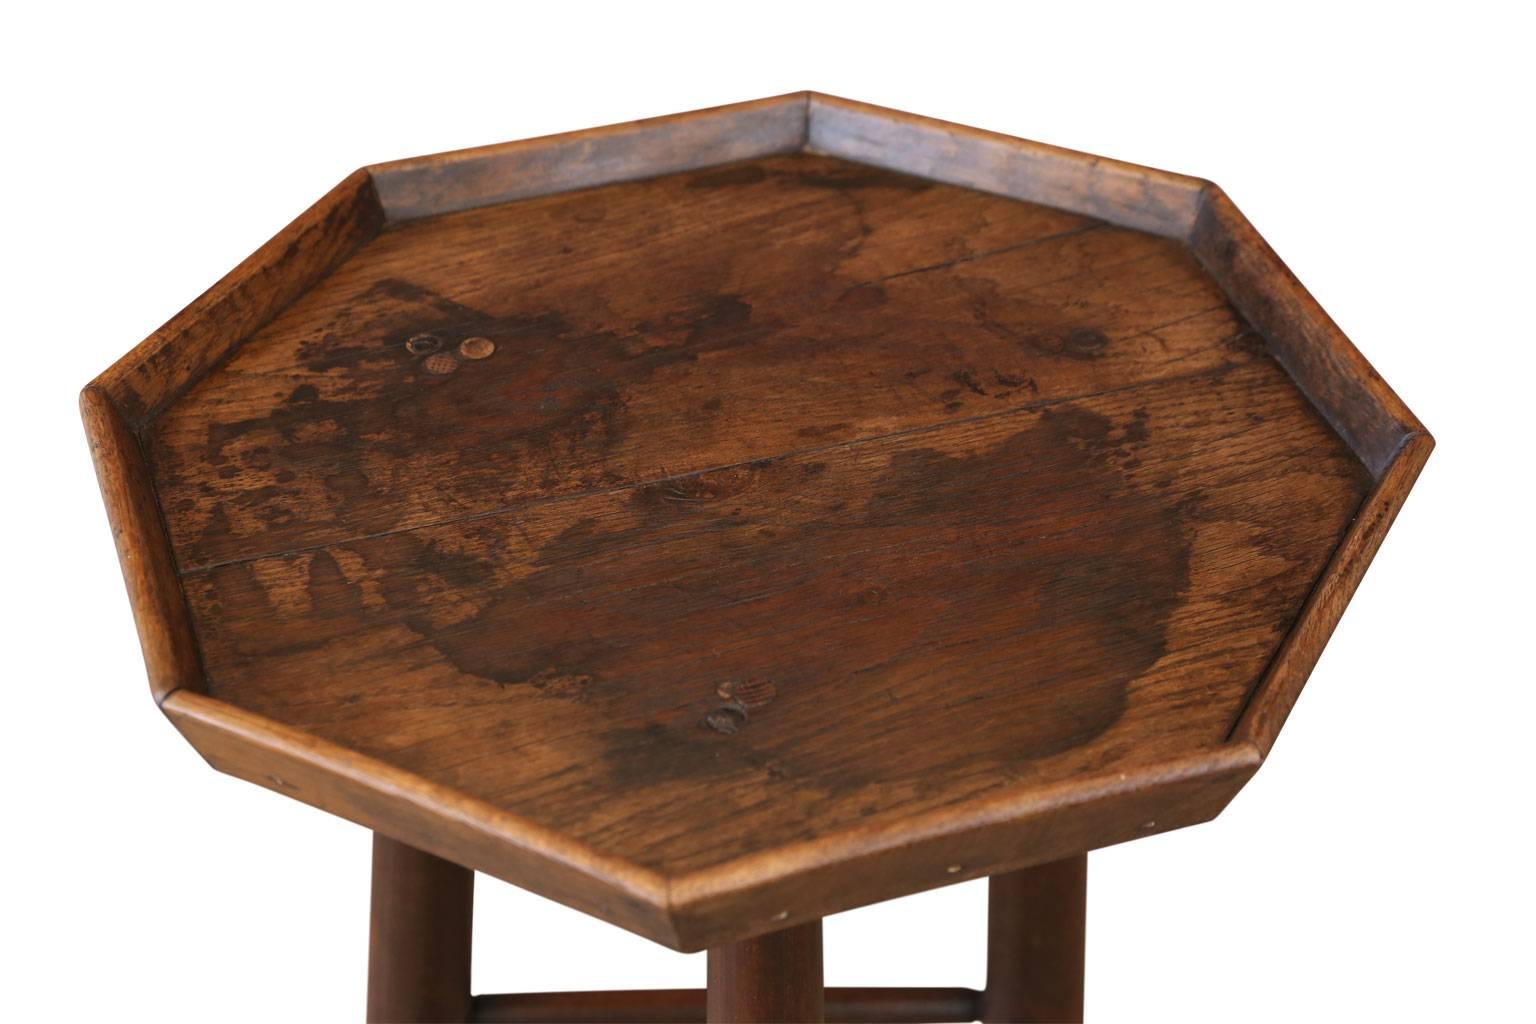 Octagonal top side table: eight-sided gallery-edge oak tray top on three simple, fruitwood legs that are joined by stretchers. Constructed in the early 19th century and in excellent, solid condition with its original colour. Perfect height for use